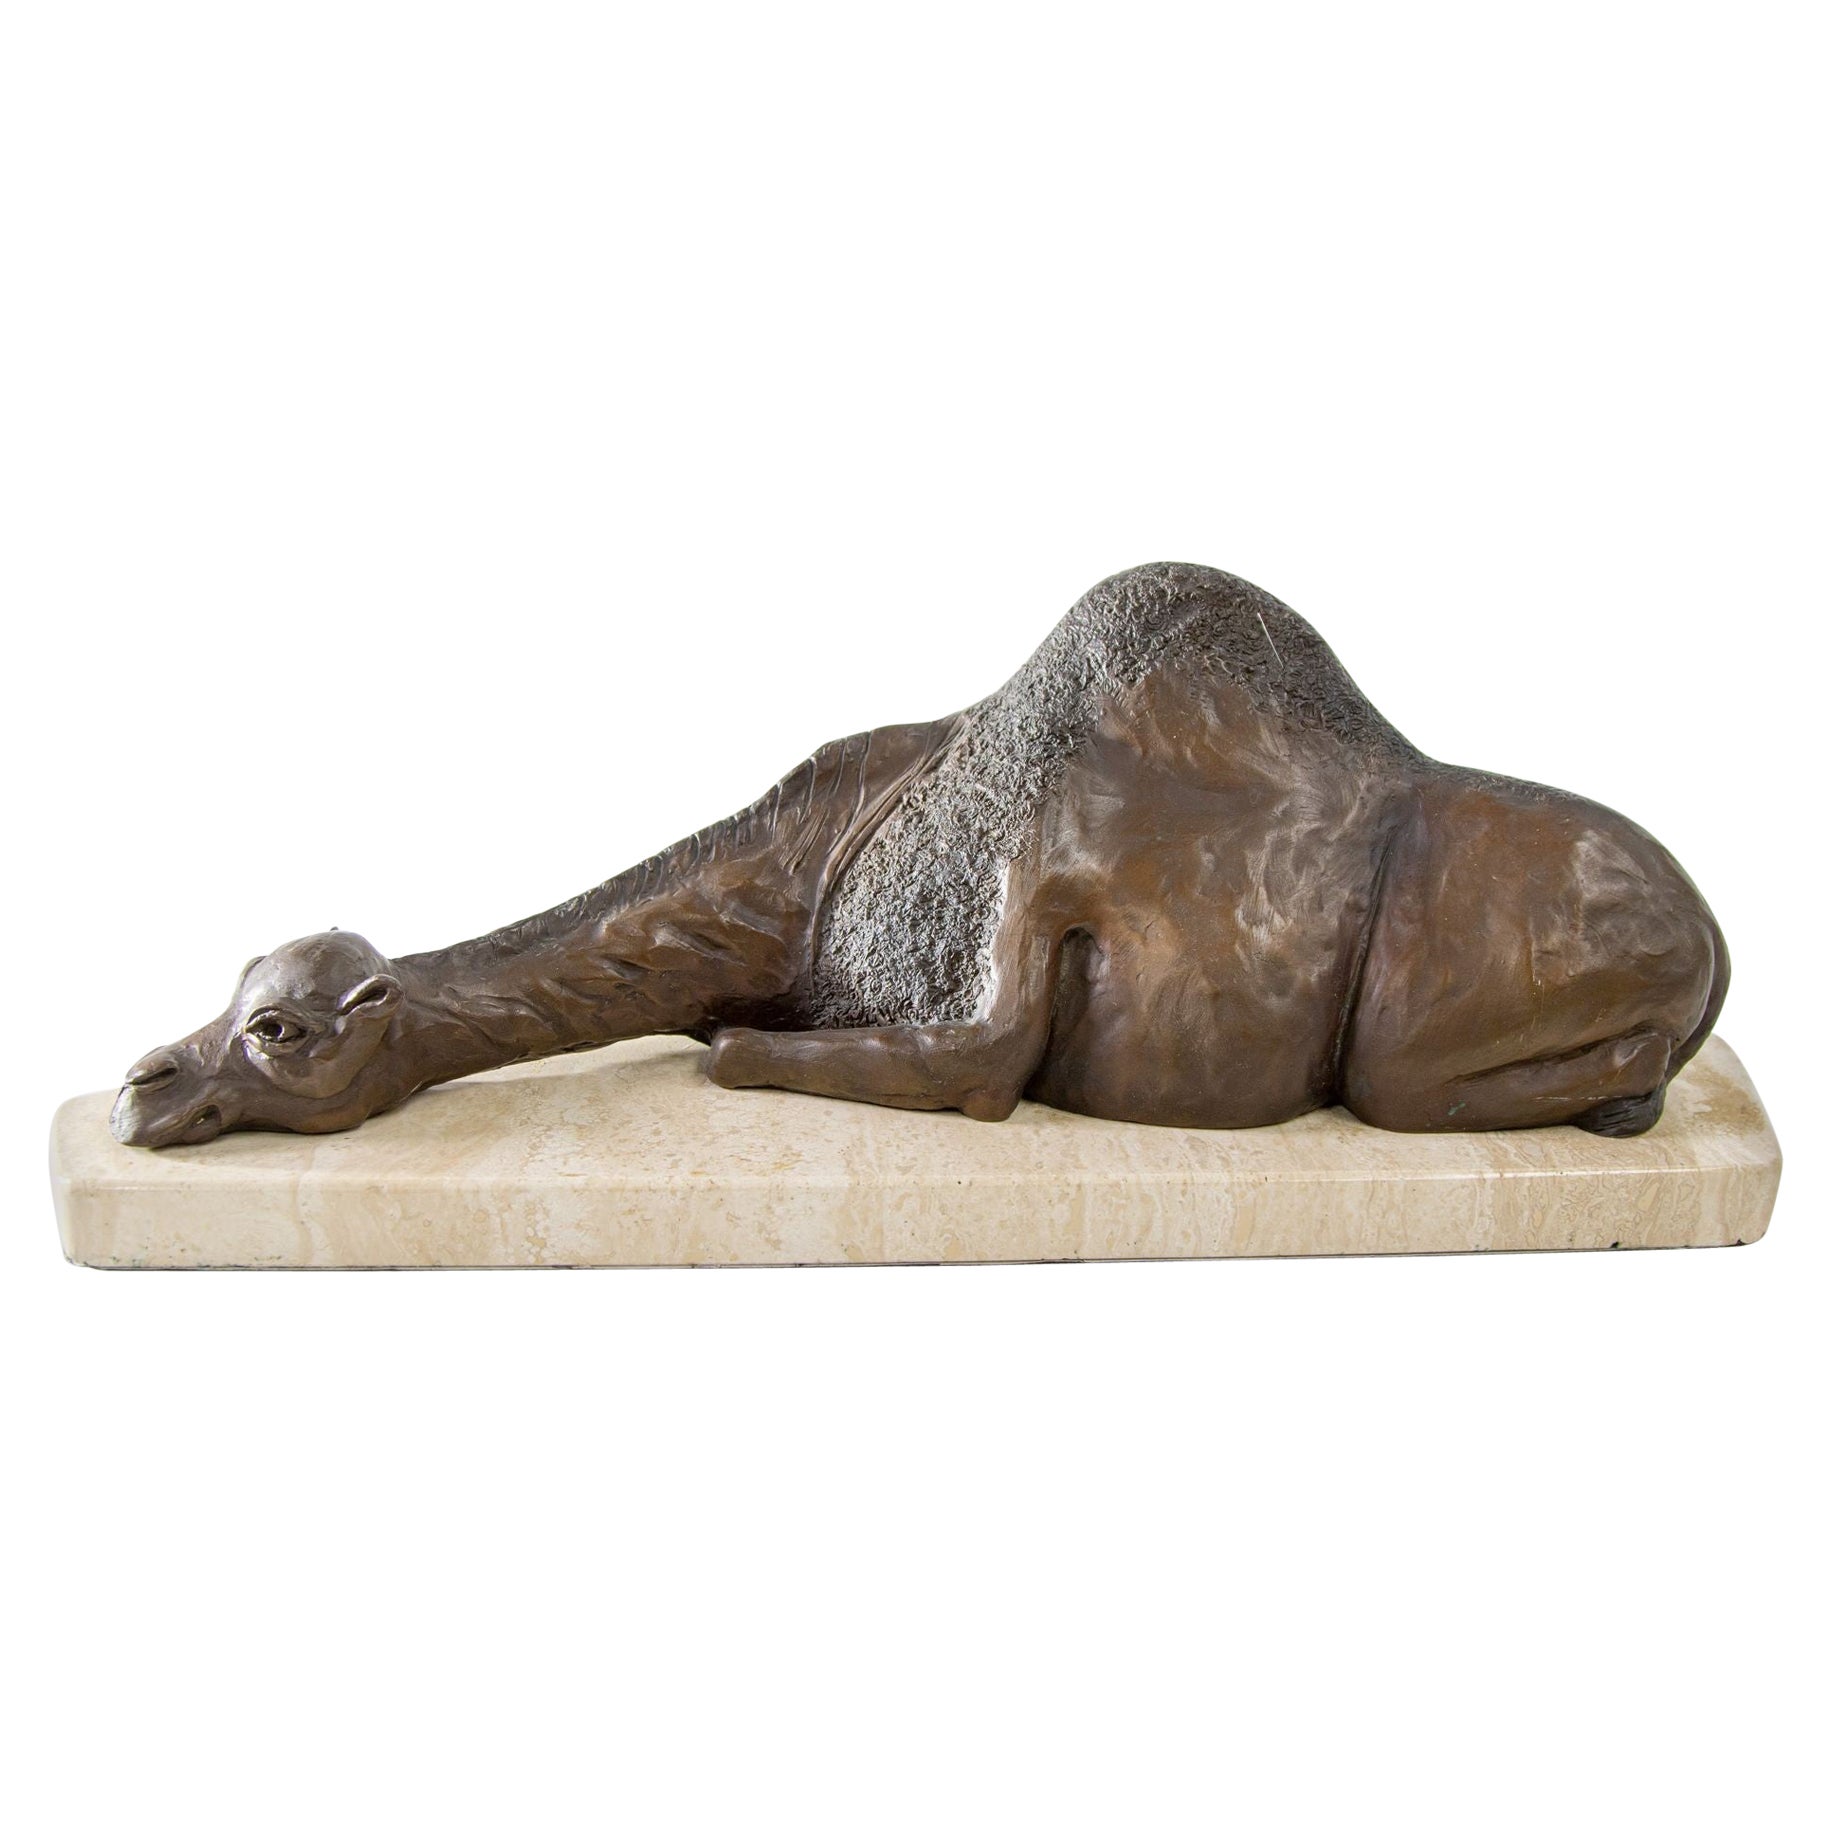 Egyptian Middle Eastern Resting Camel Sculpture on Marble Stand